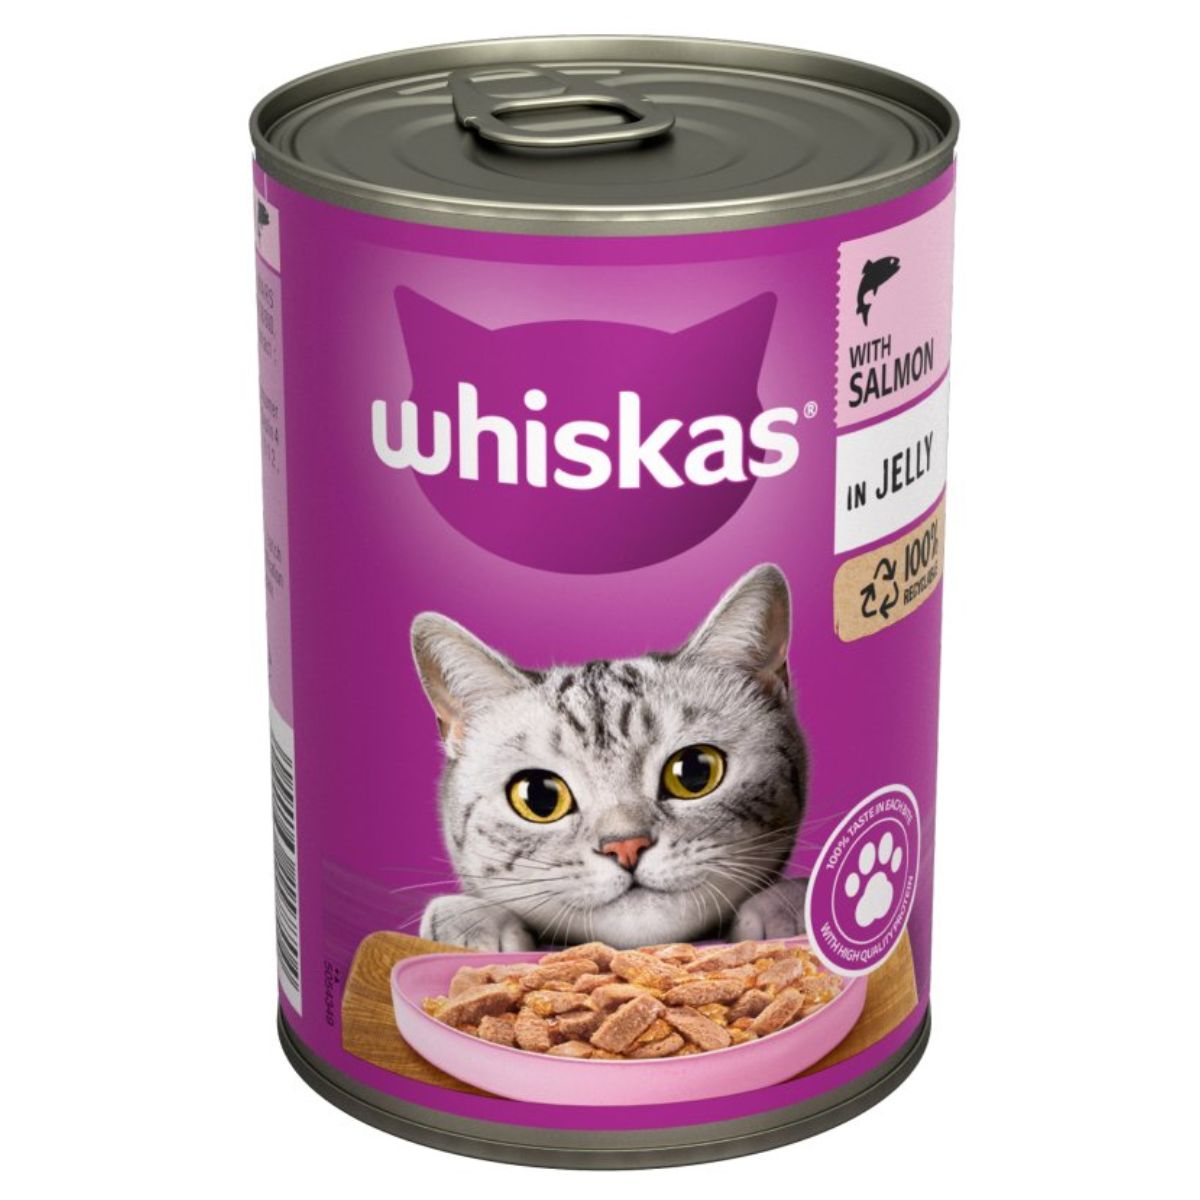 A can of Whiskas - Salmon In Jelly - 400g cat food on a white background.